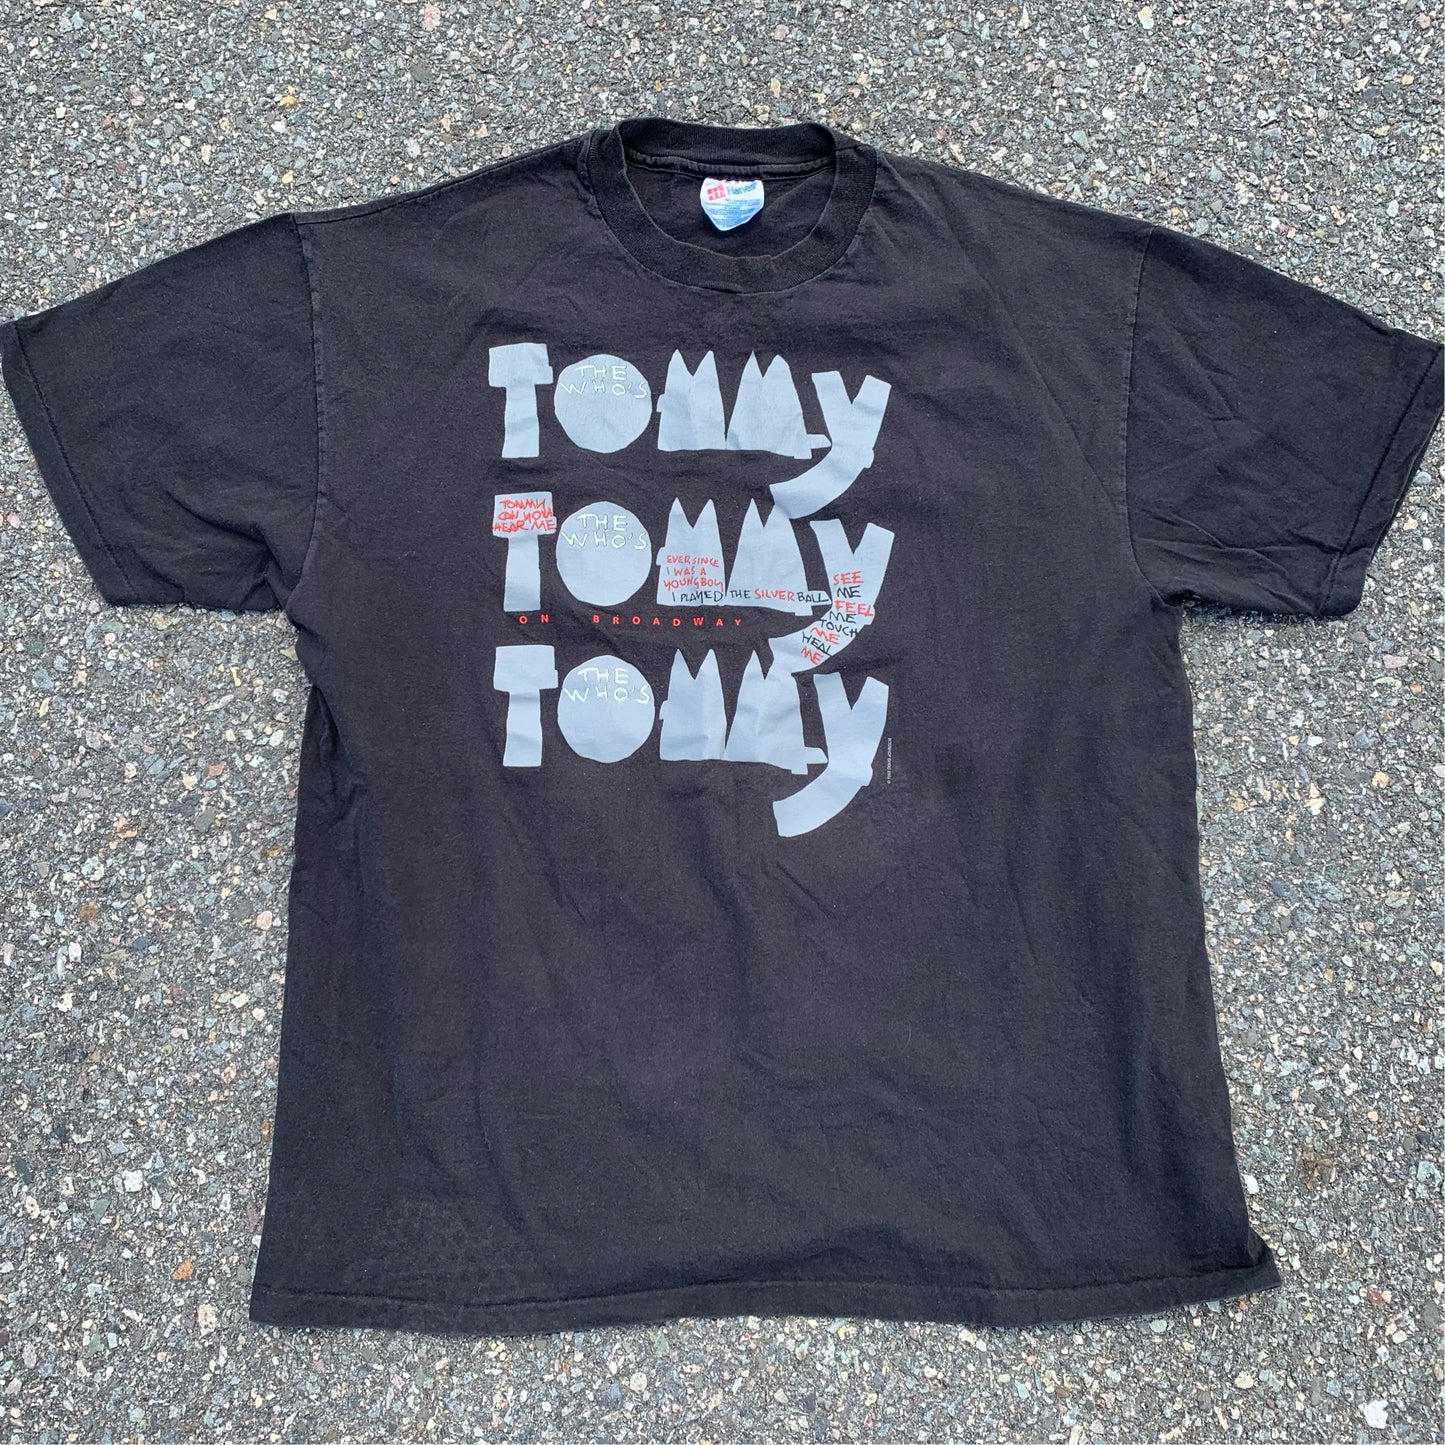 Vintage The Who Tommy Album Tour Broadway 30th Anniversary 1993 Band T Shirt Size XL Black